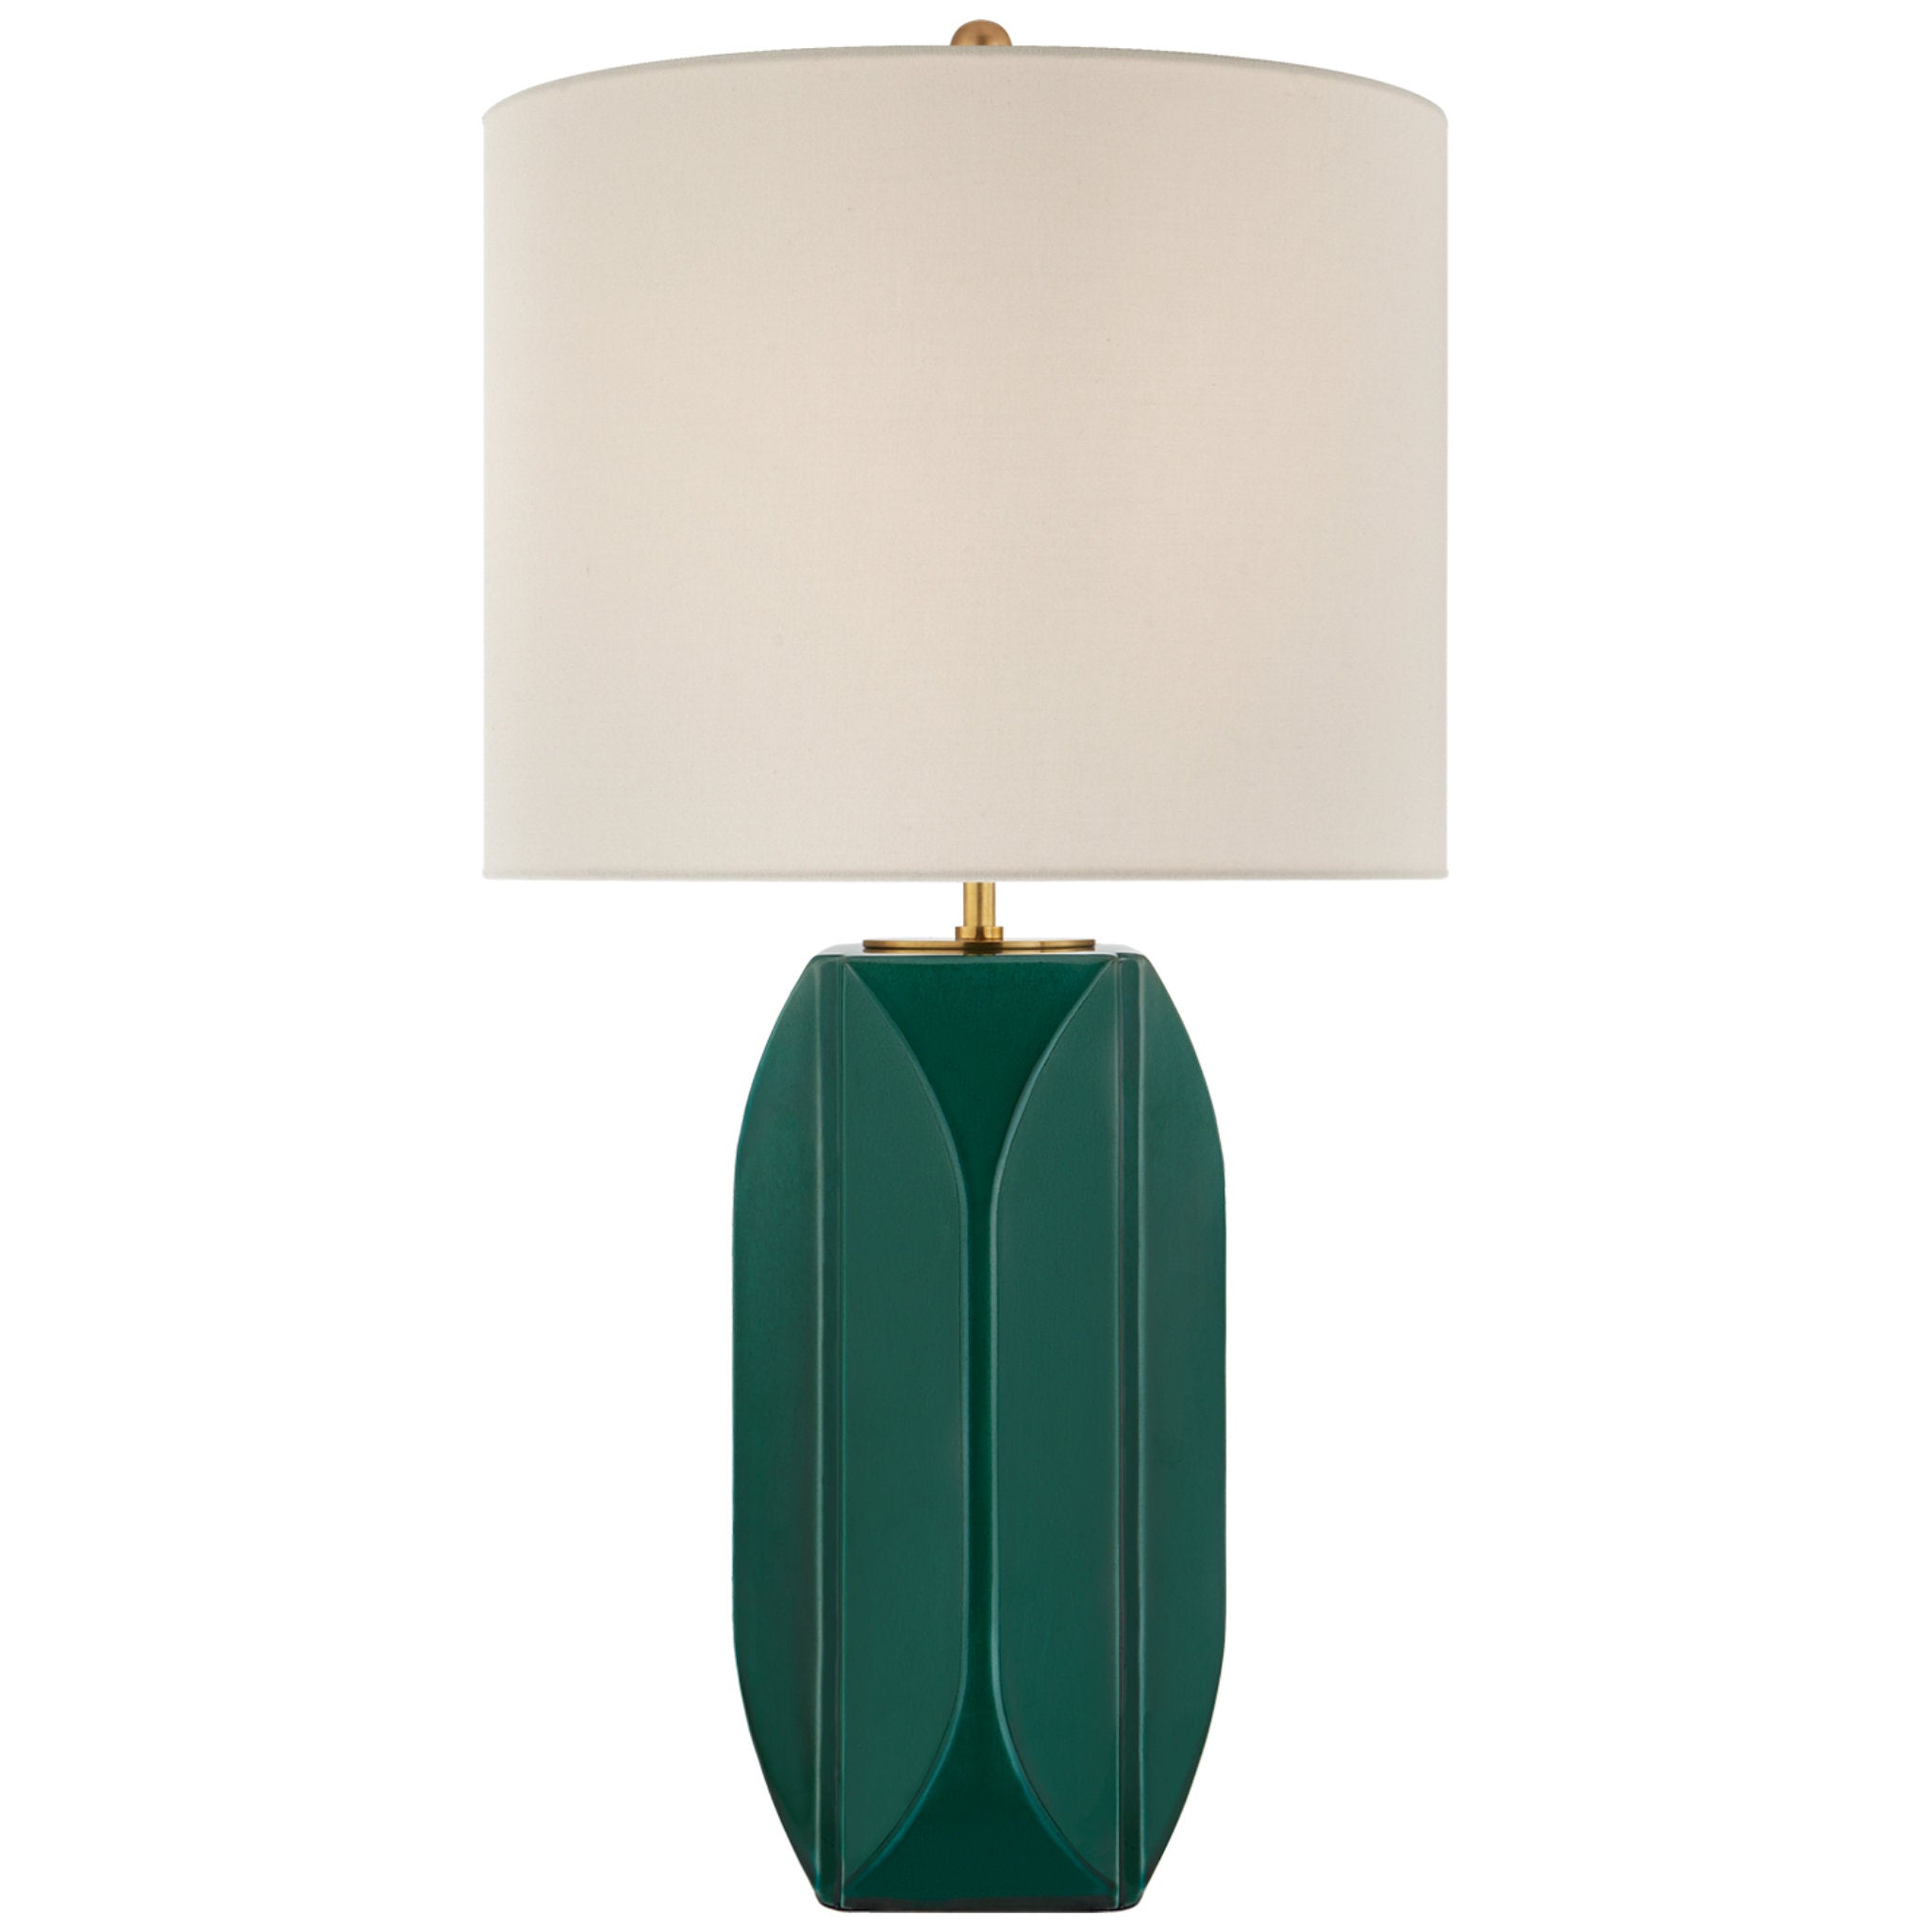 kate spade new york Carmilla Medium Table Lamp in Emerald Crackle with Linen Shade